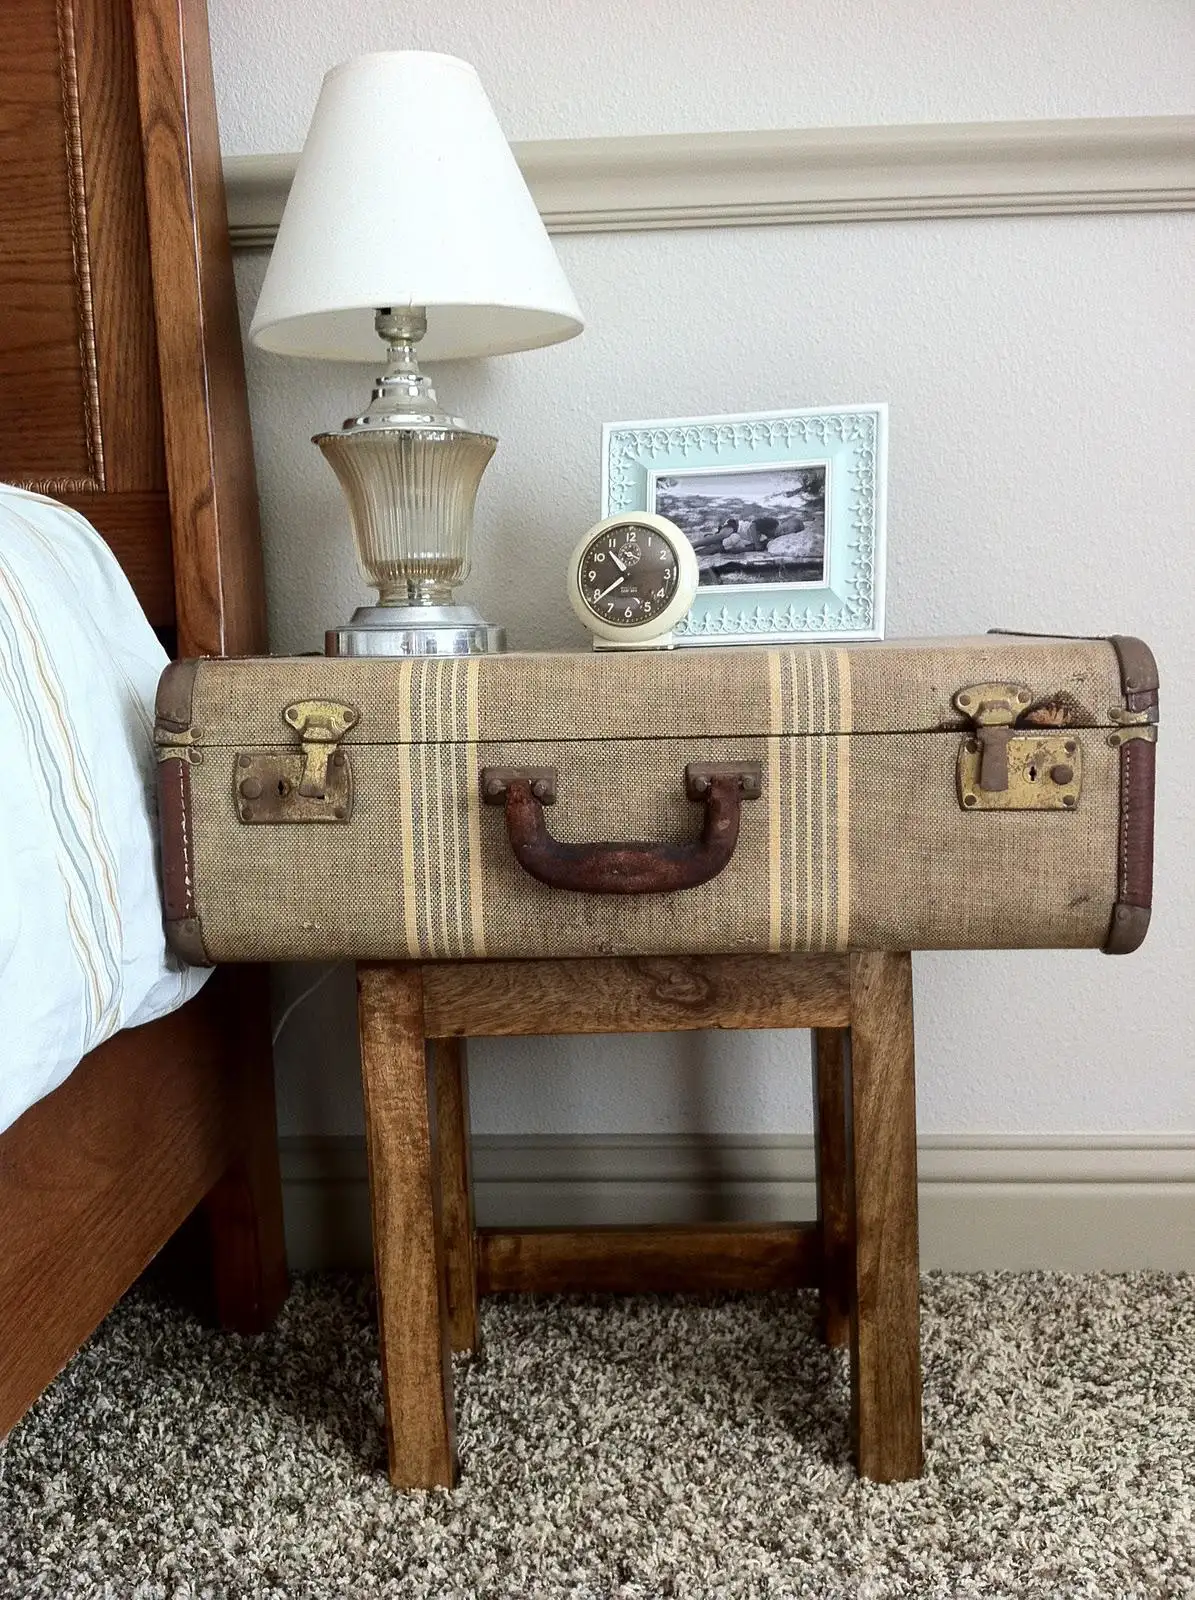 Bring Colonial vibes with vintage suitcases